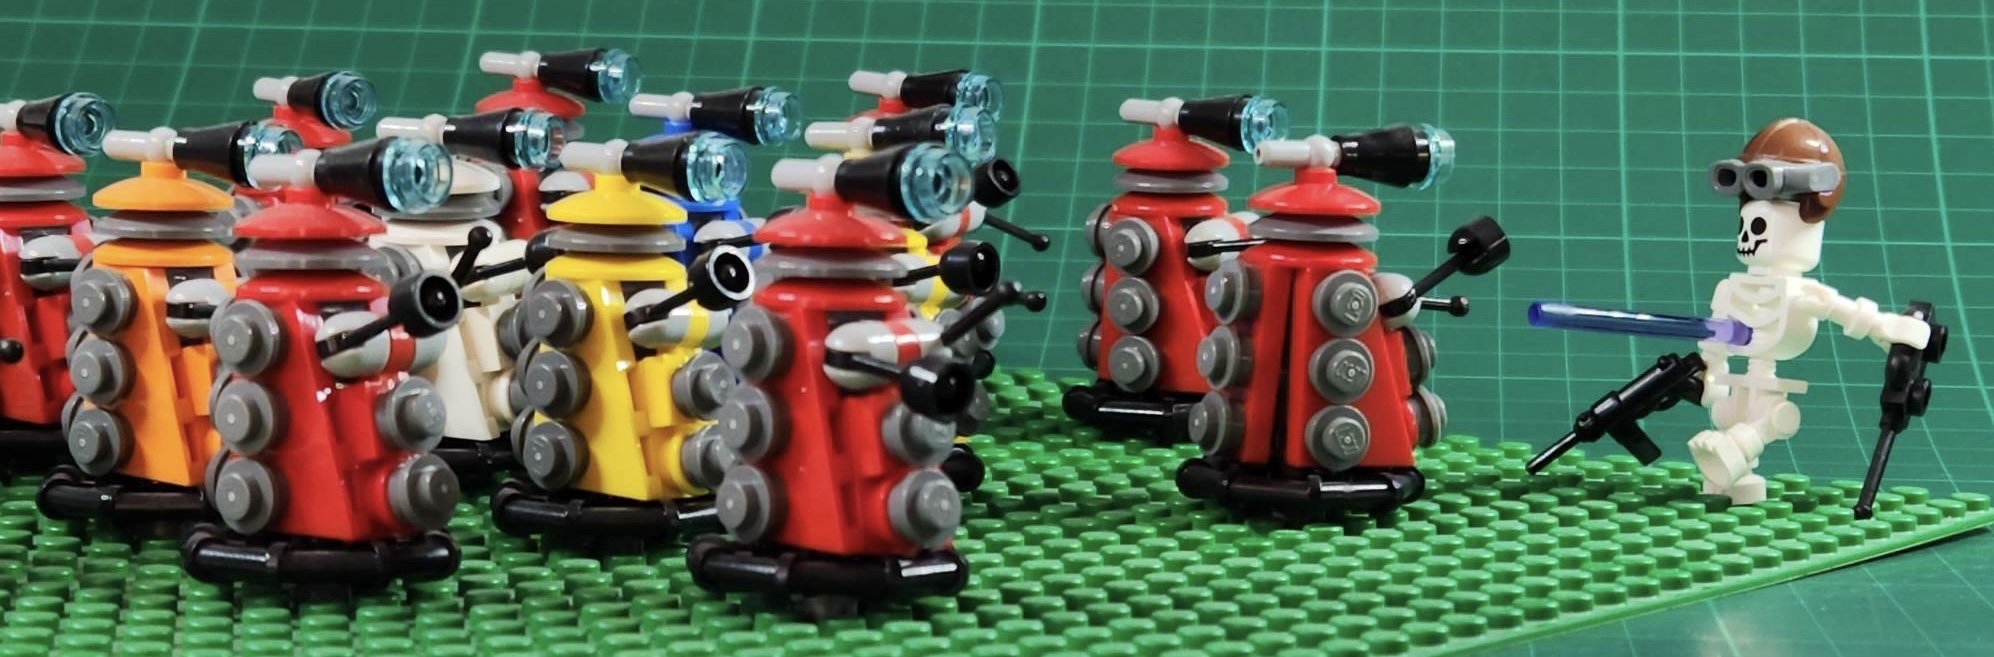 LEGO Doctor Who in the Land of Oz - BrickNerd - All things LEGO and the LEGO  fan community